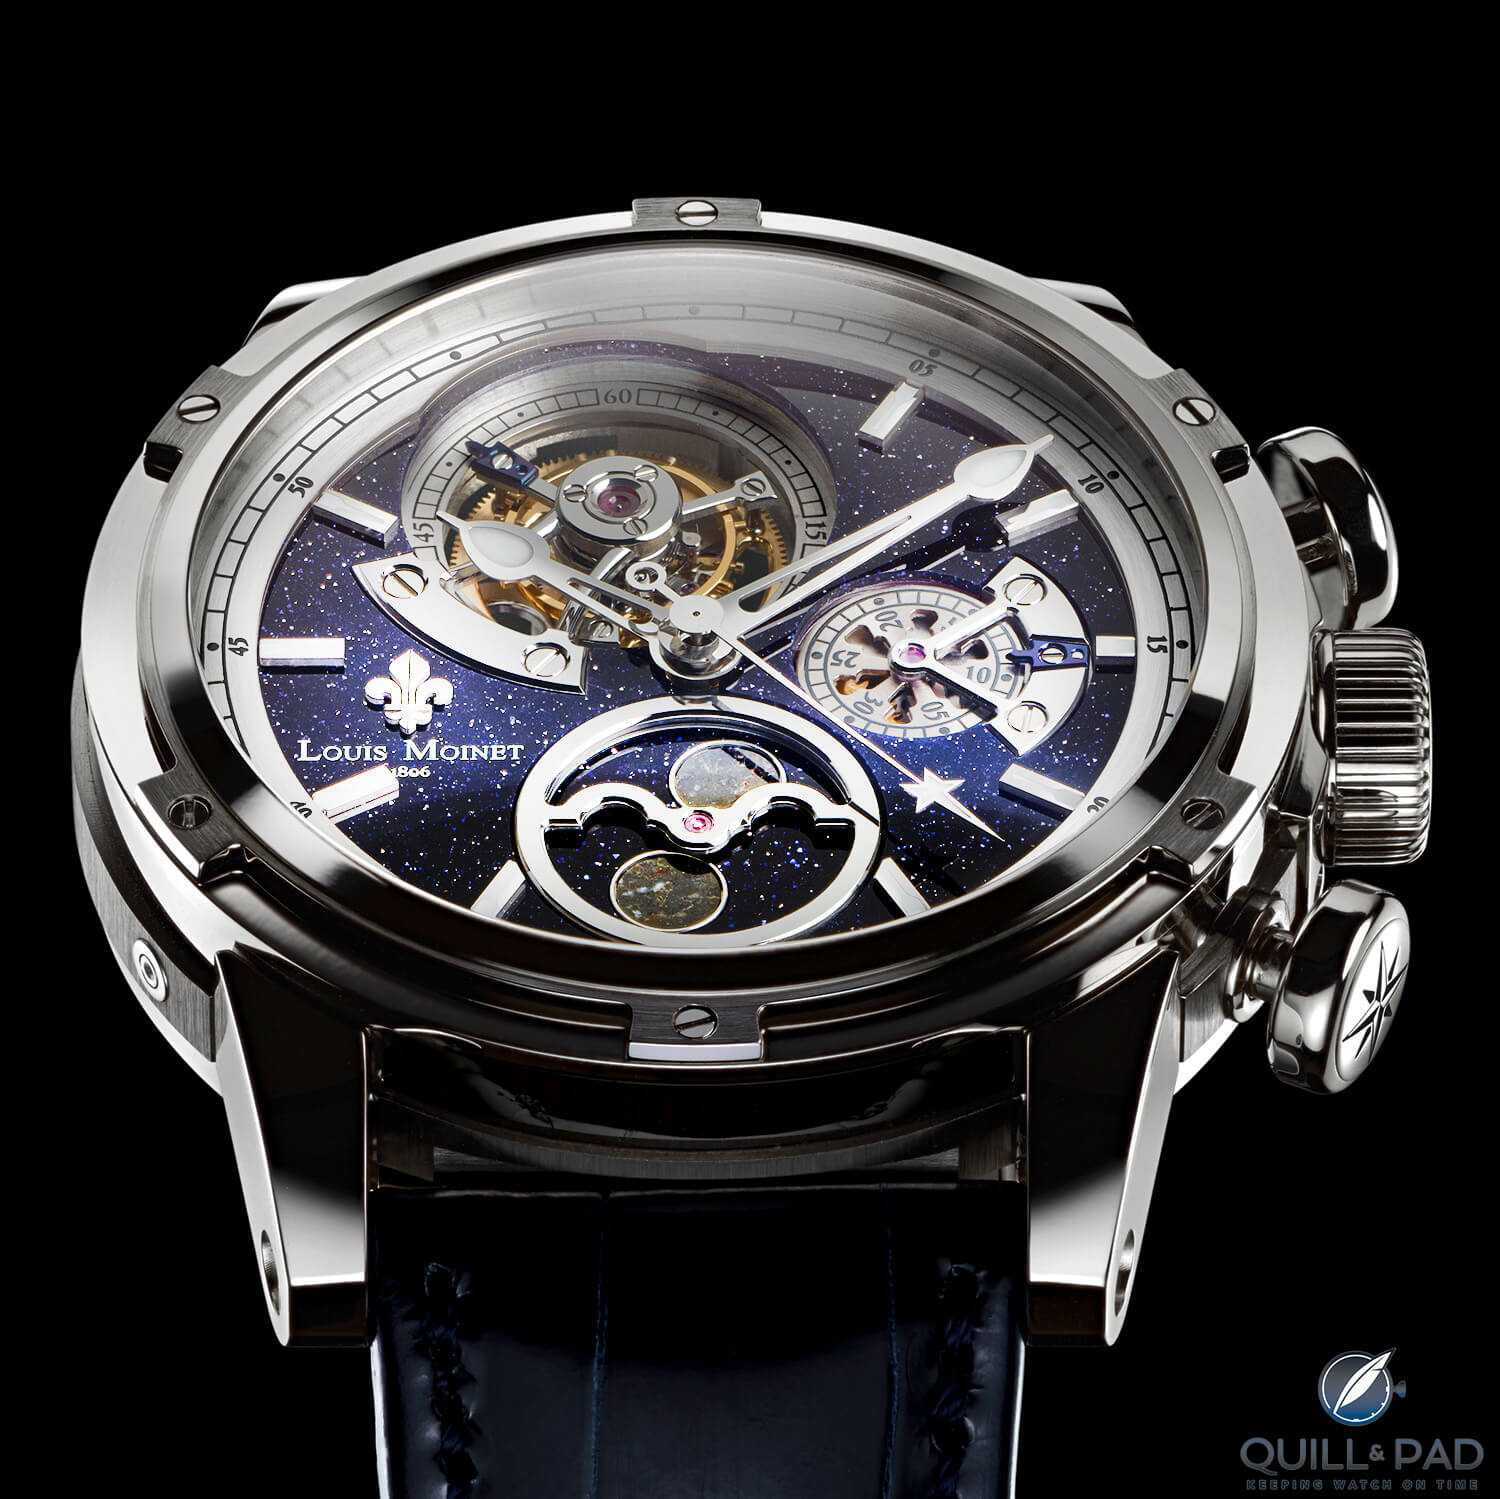 AstroMoon by Louis Moinet with a beautiful and complicated aventurine dial